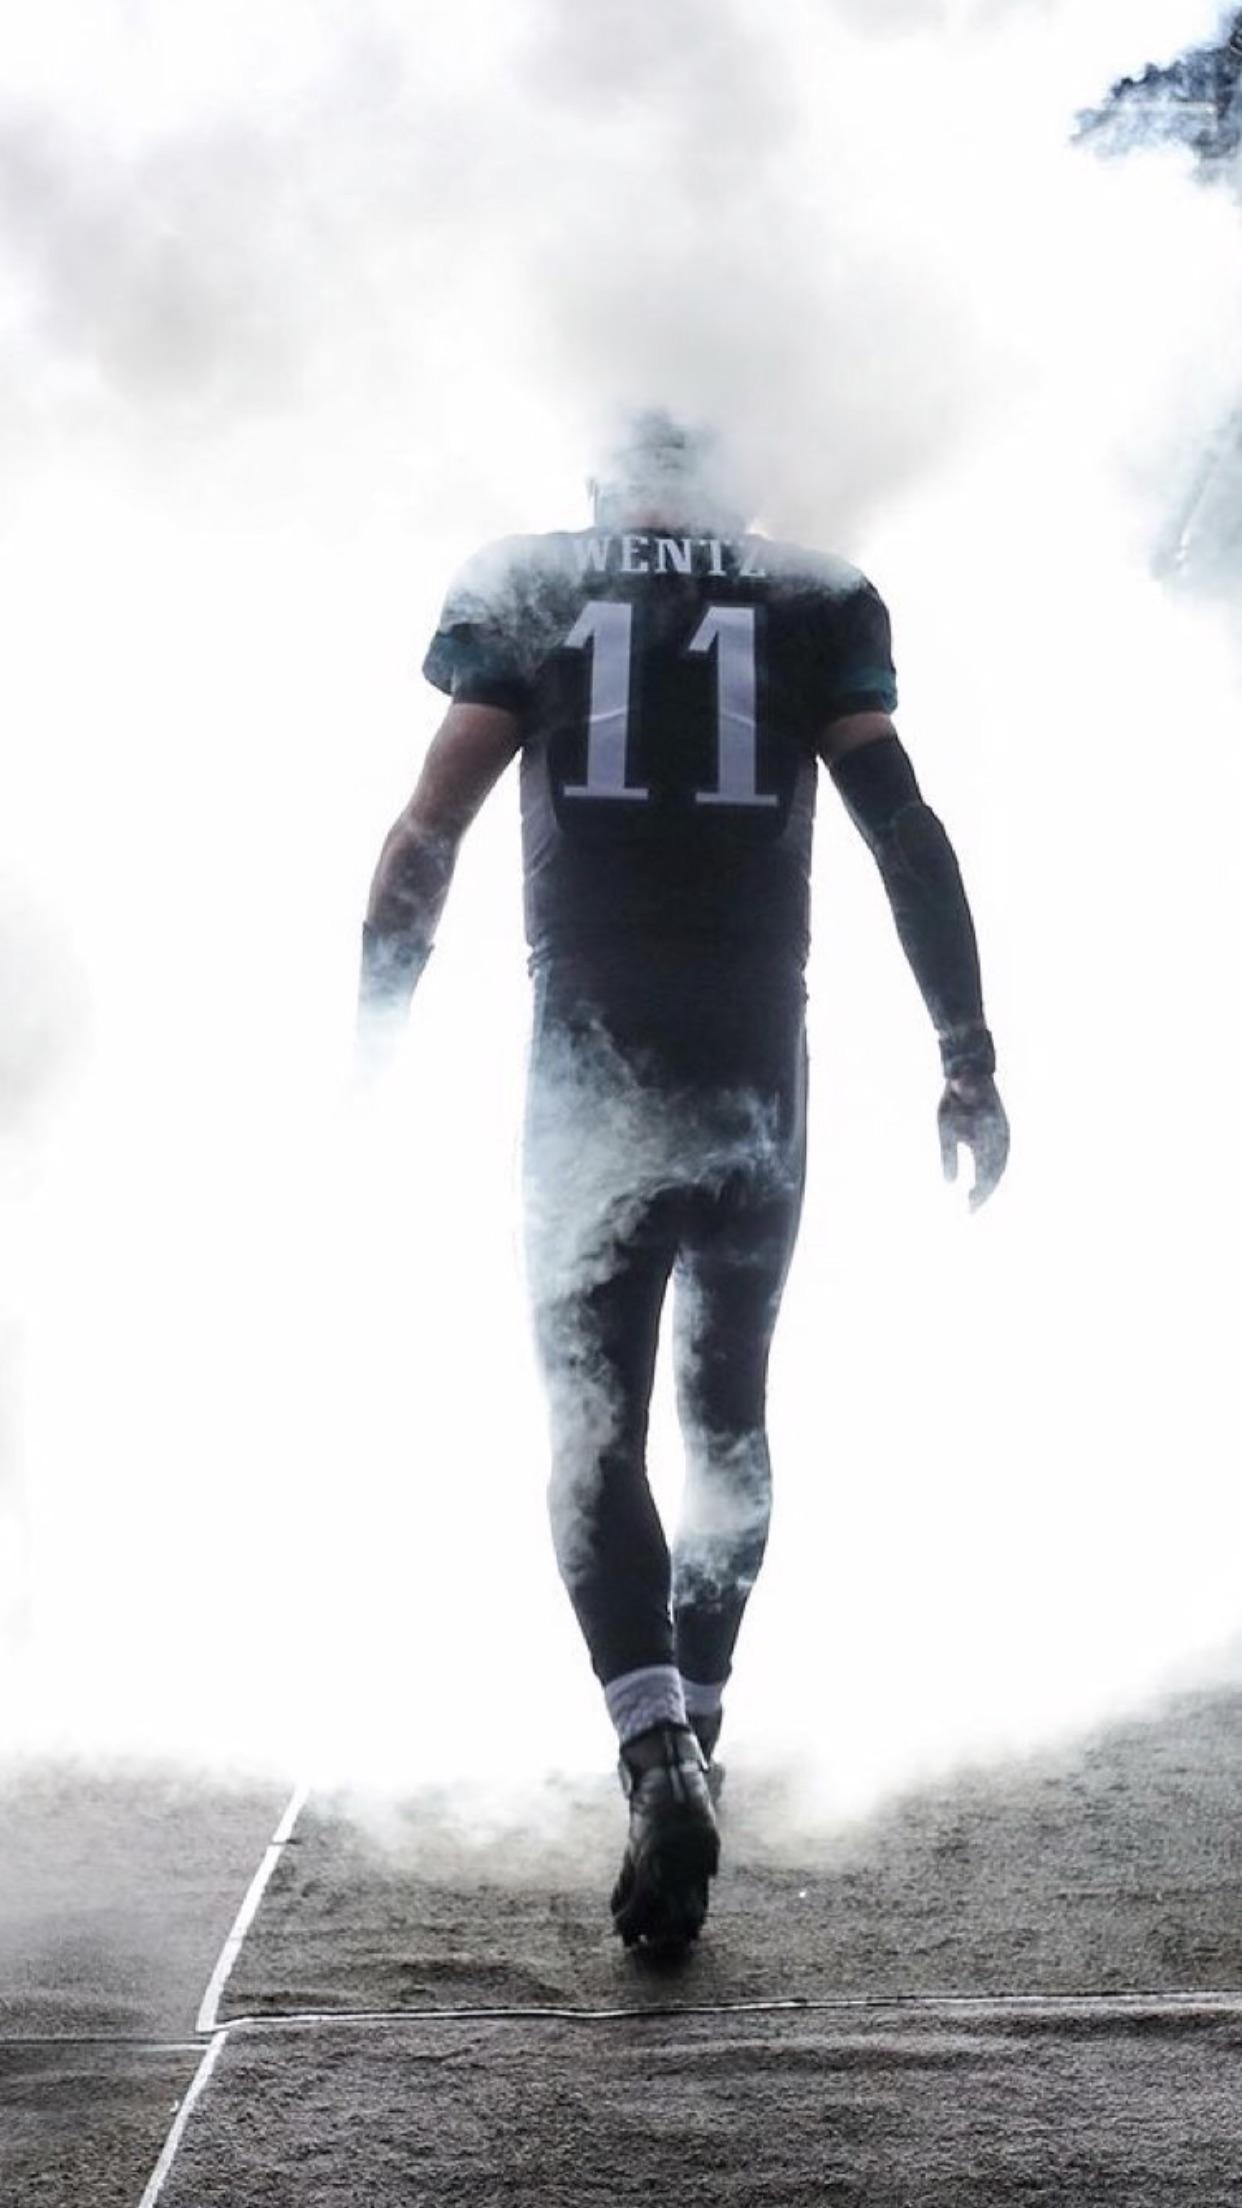 Request: Does anyone have a dope Nick Foles wallpaper? I